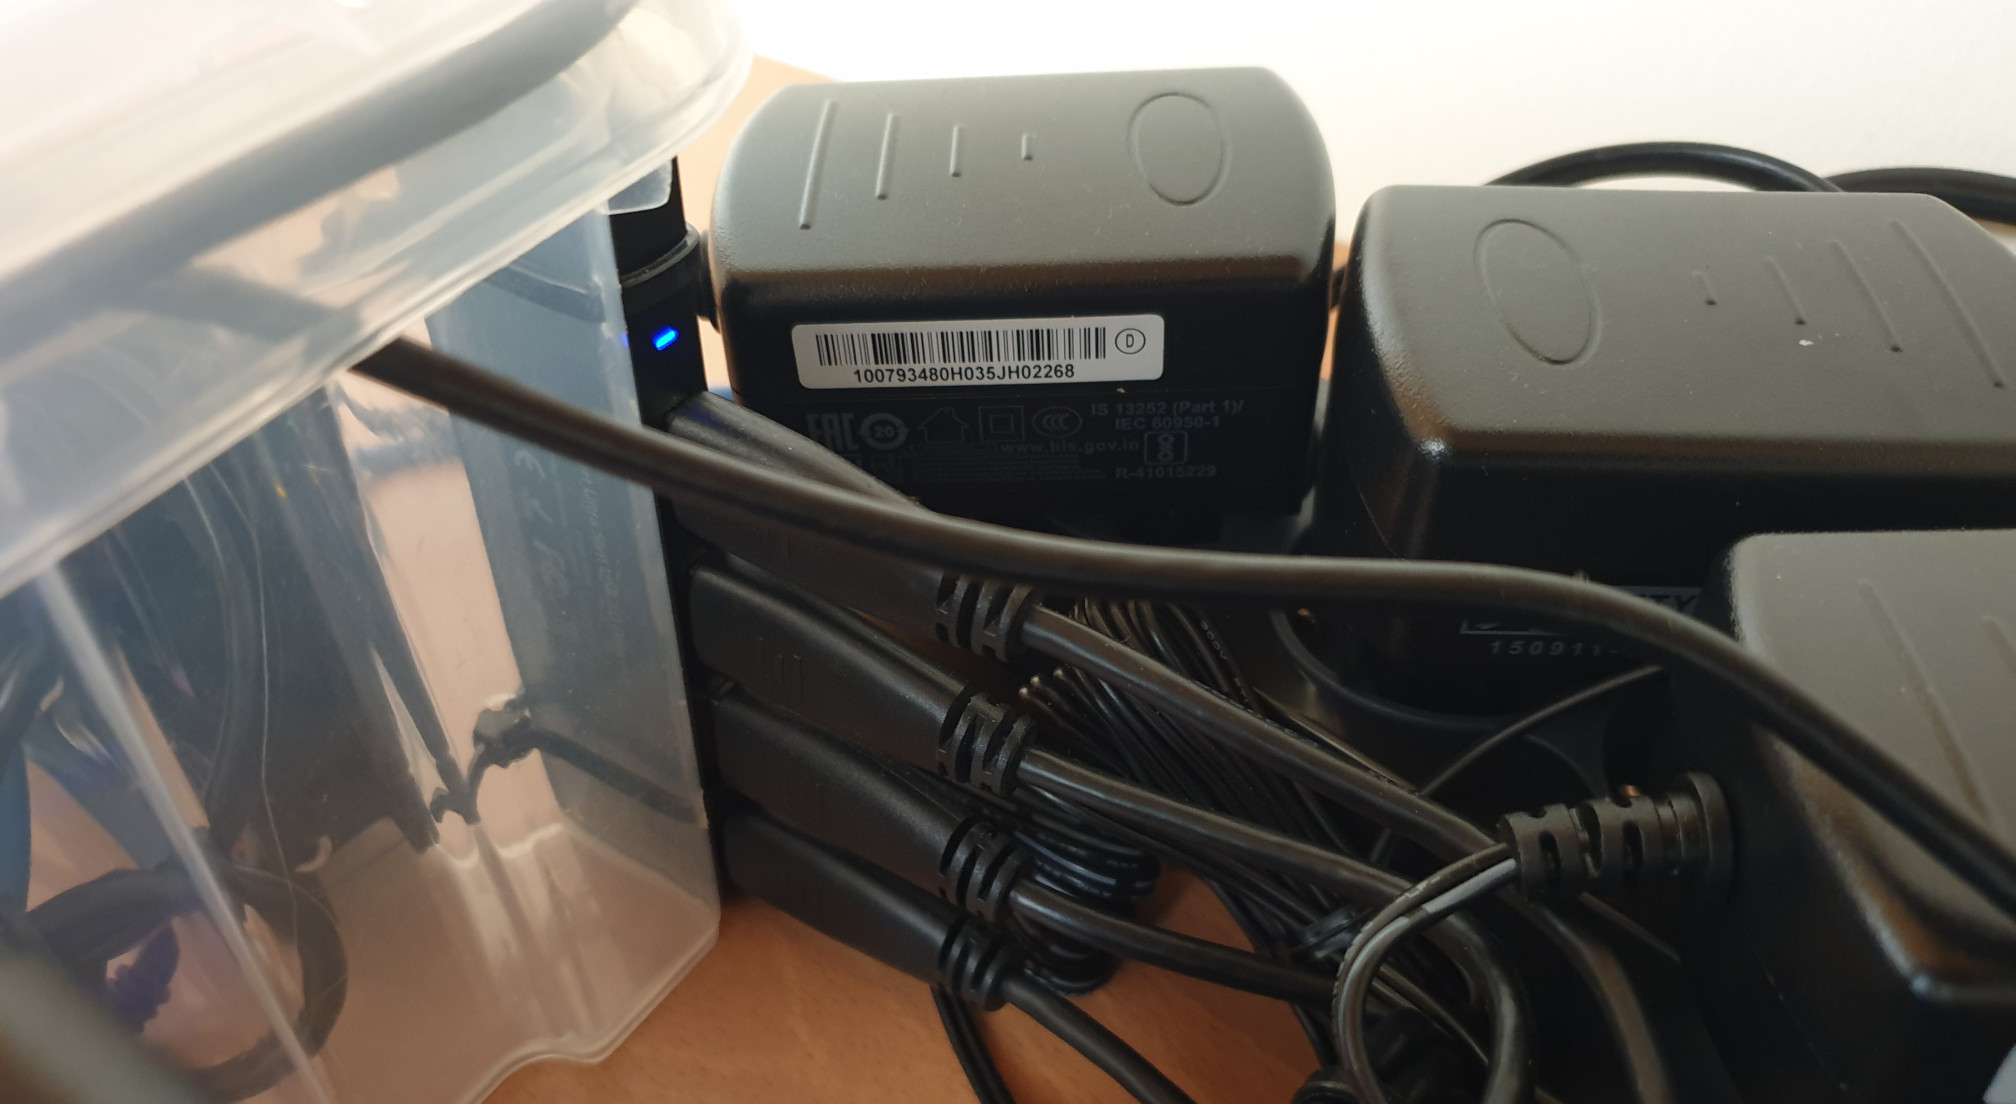 USB hub connected to 4 drives